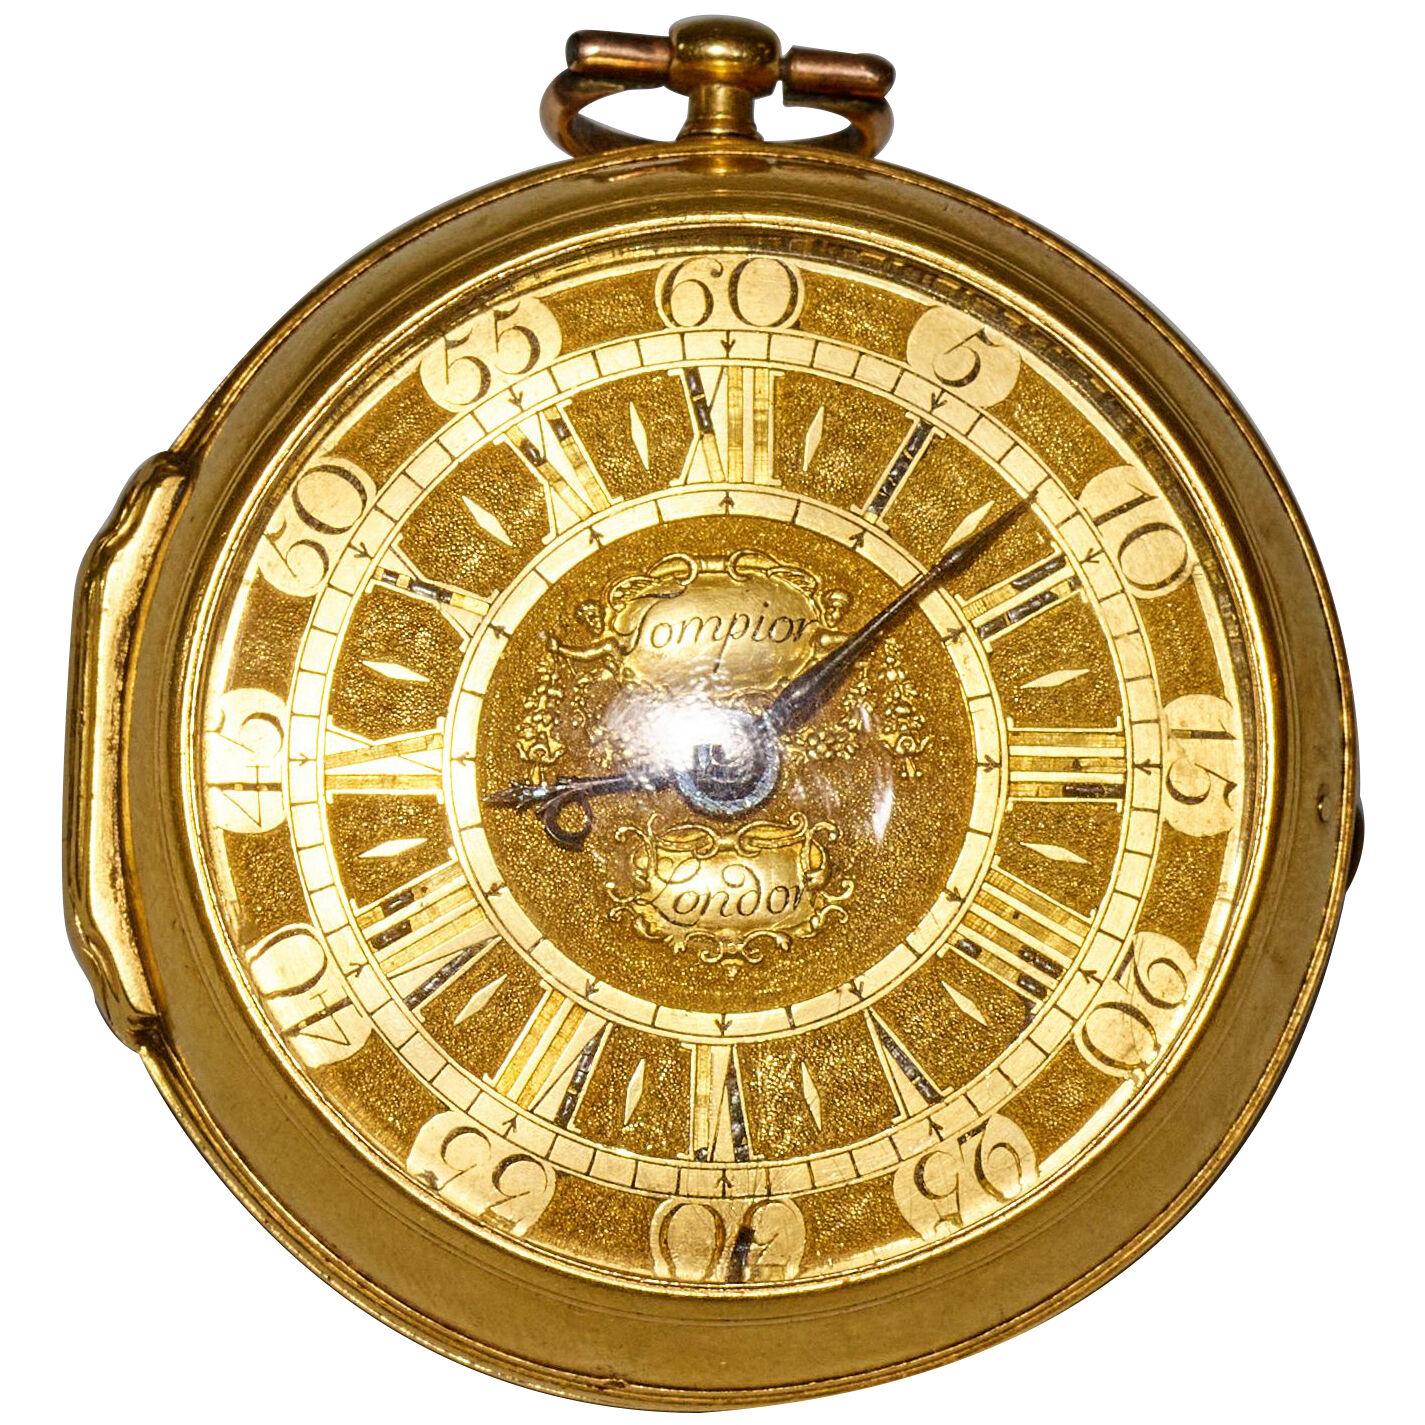 Gold Pocket Watch by Thomas Tompion of London